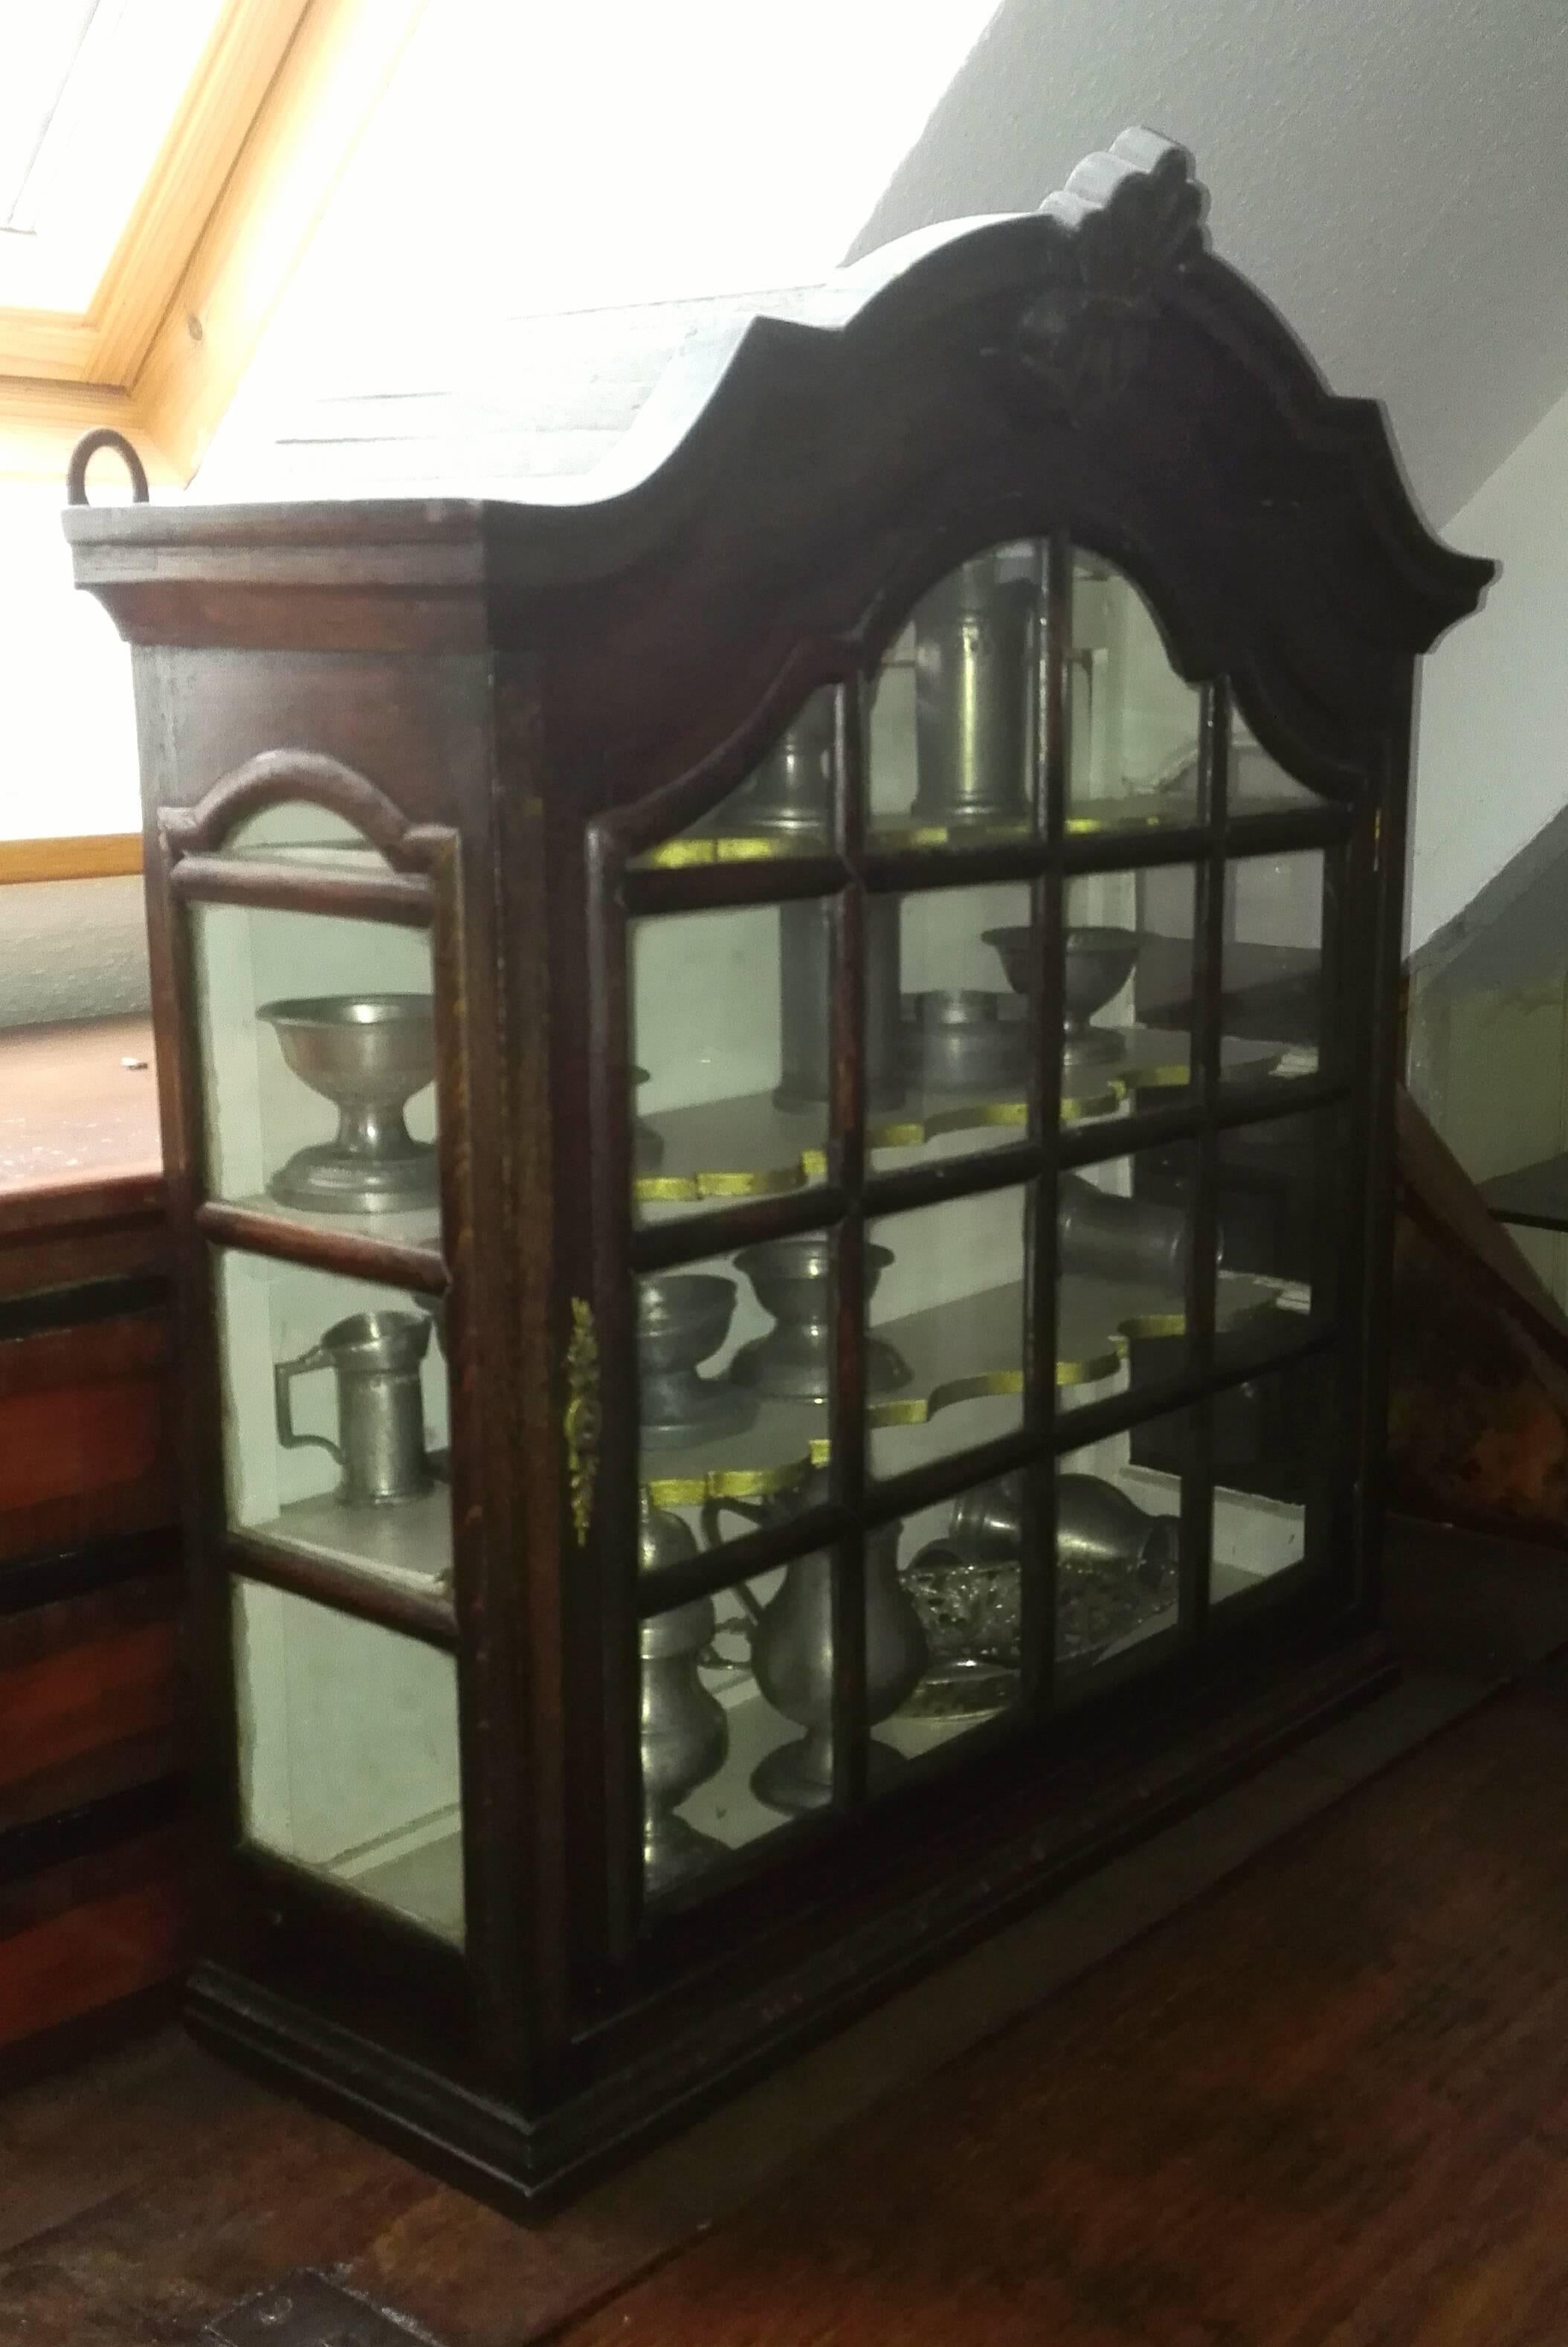 This small , but very well-proportioned hanging display case (known in Germany as Buddelei), dates from the second half of the 19th century and is made of solid black - brown patinated oak!
The double-curved head shape with capstone (cartouche),